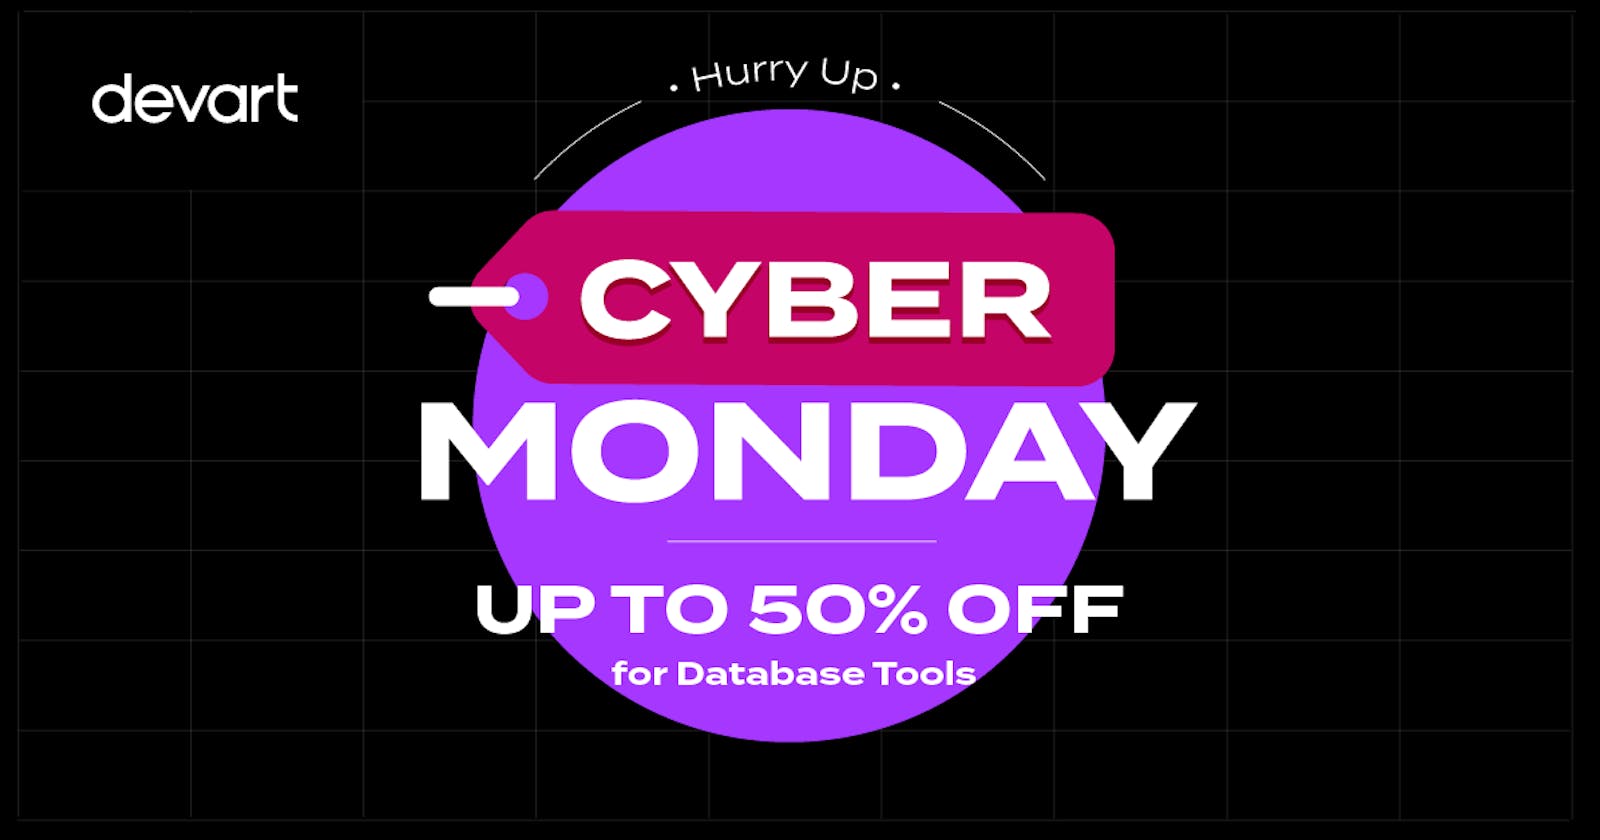 ⚡ Cyber Monday is in full swing! Here's the last chance to save up to 50% on Devart database products!